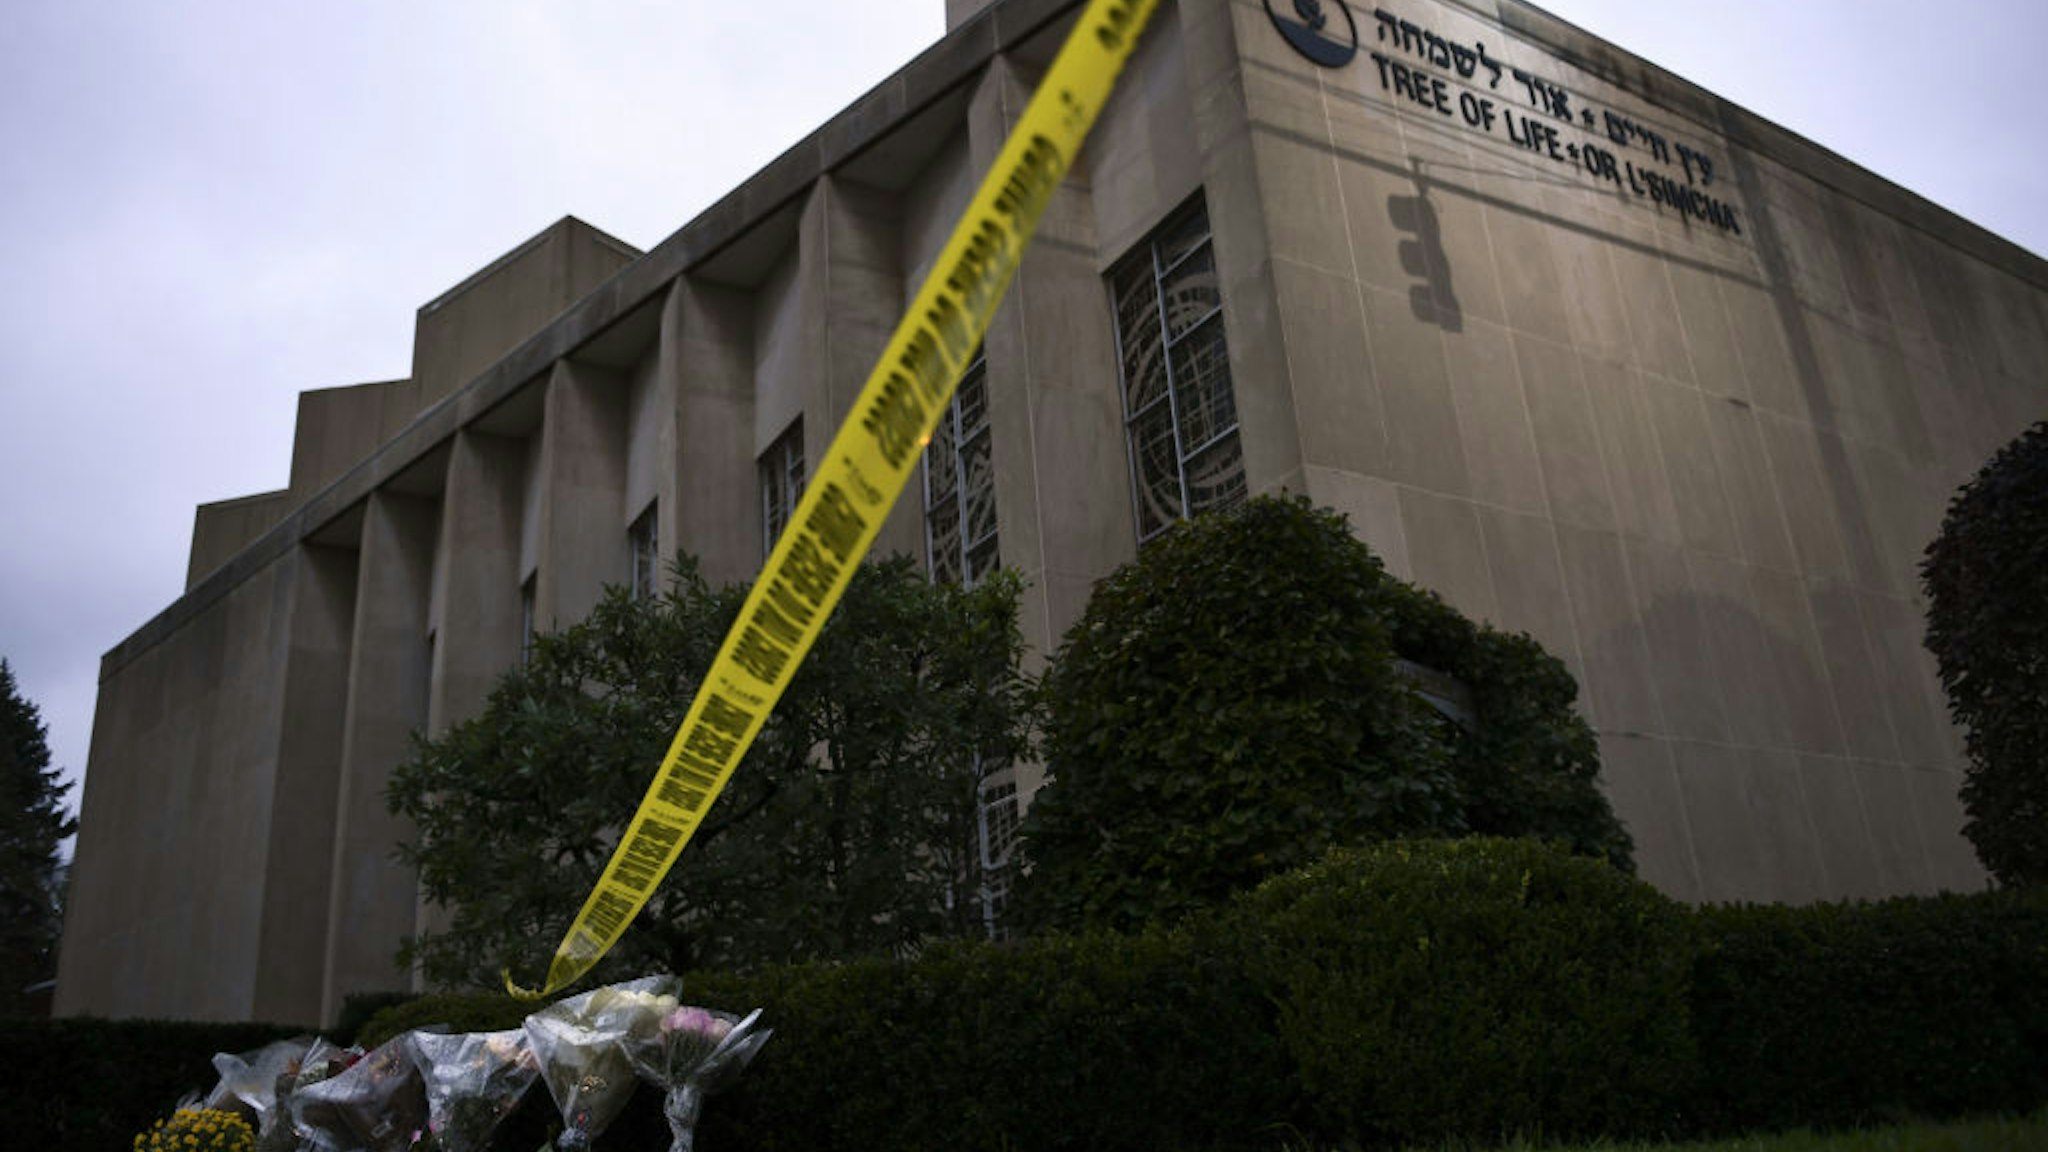 Police tape and memorial flowers are seen on October 28, 2018 outside the Tree of Life Synagogue after a shooting there left 11 people dead in the Squirrel Hill neighborhood of Pittsburgh on October 27, 2018. - A man suspected of bursting into a Pittsburgh synagogue during a baby-naming ceremony and gunning down 11 people has been charged with murder, in the deadliest anti-Semitic attack in recent US history. The suspect -- identified as a 46-year-old Robert Bowers -- reportedly yelled "All Jews must die" as he sprayed bullets into the Tree of Life synagogue during Sabbath services on Saturday before exchanging fire with police, in an attack that also wounded six people. (Photo by Brendan Smialowski / AFP)